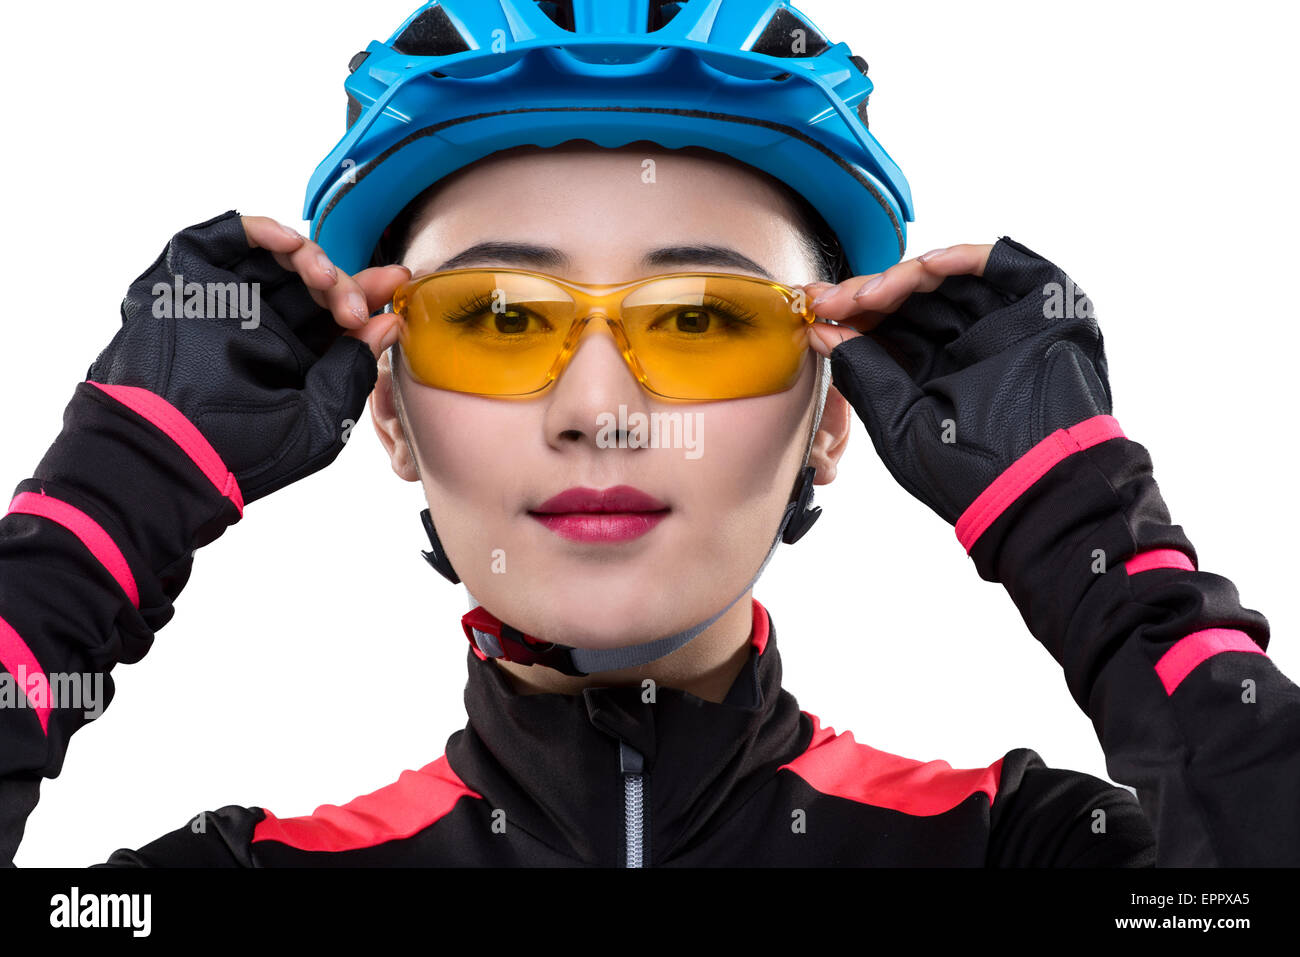 Young female cyclist adjusting sunglasses Stock Photo